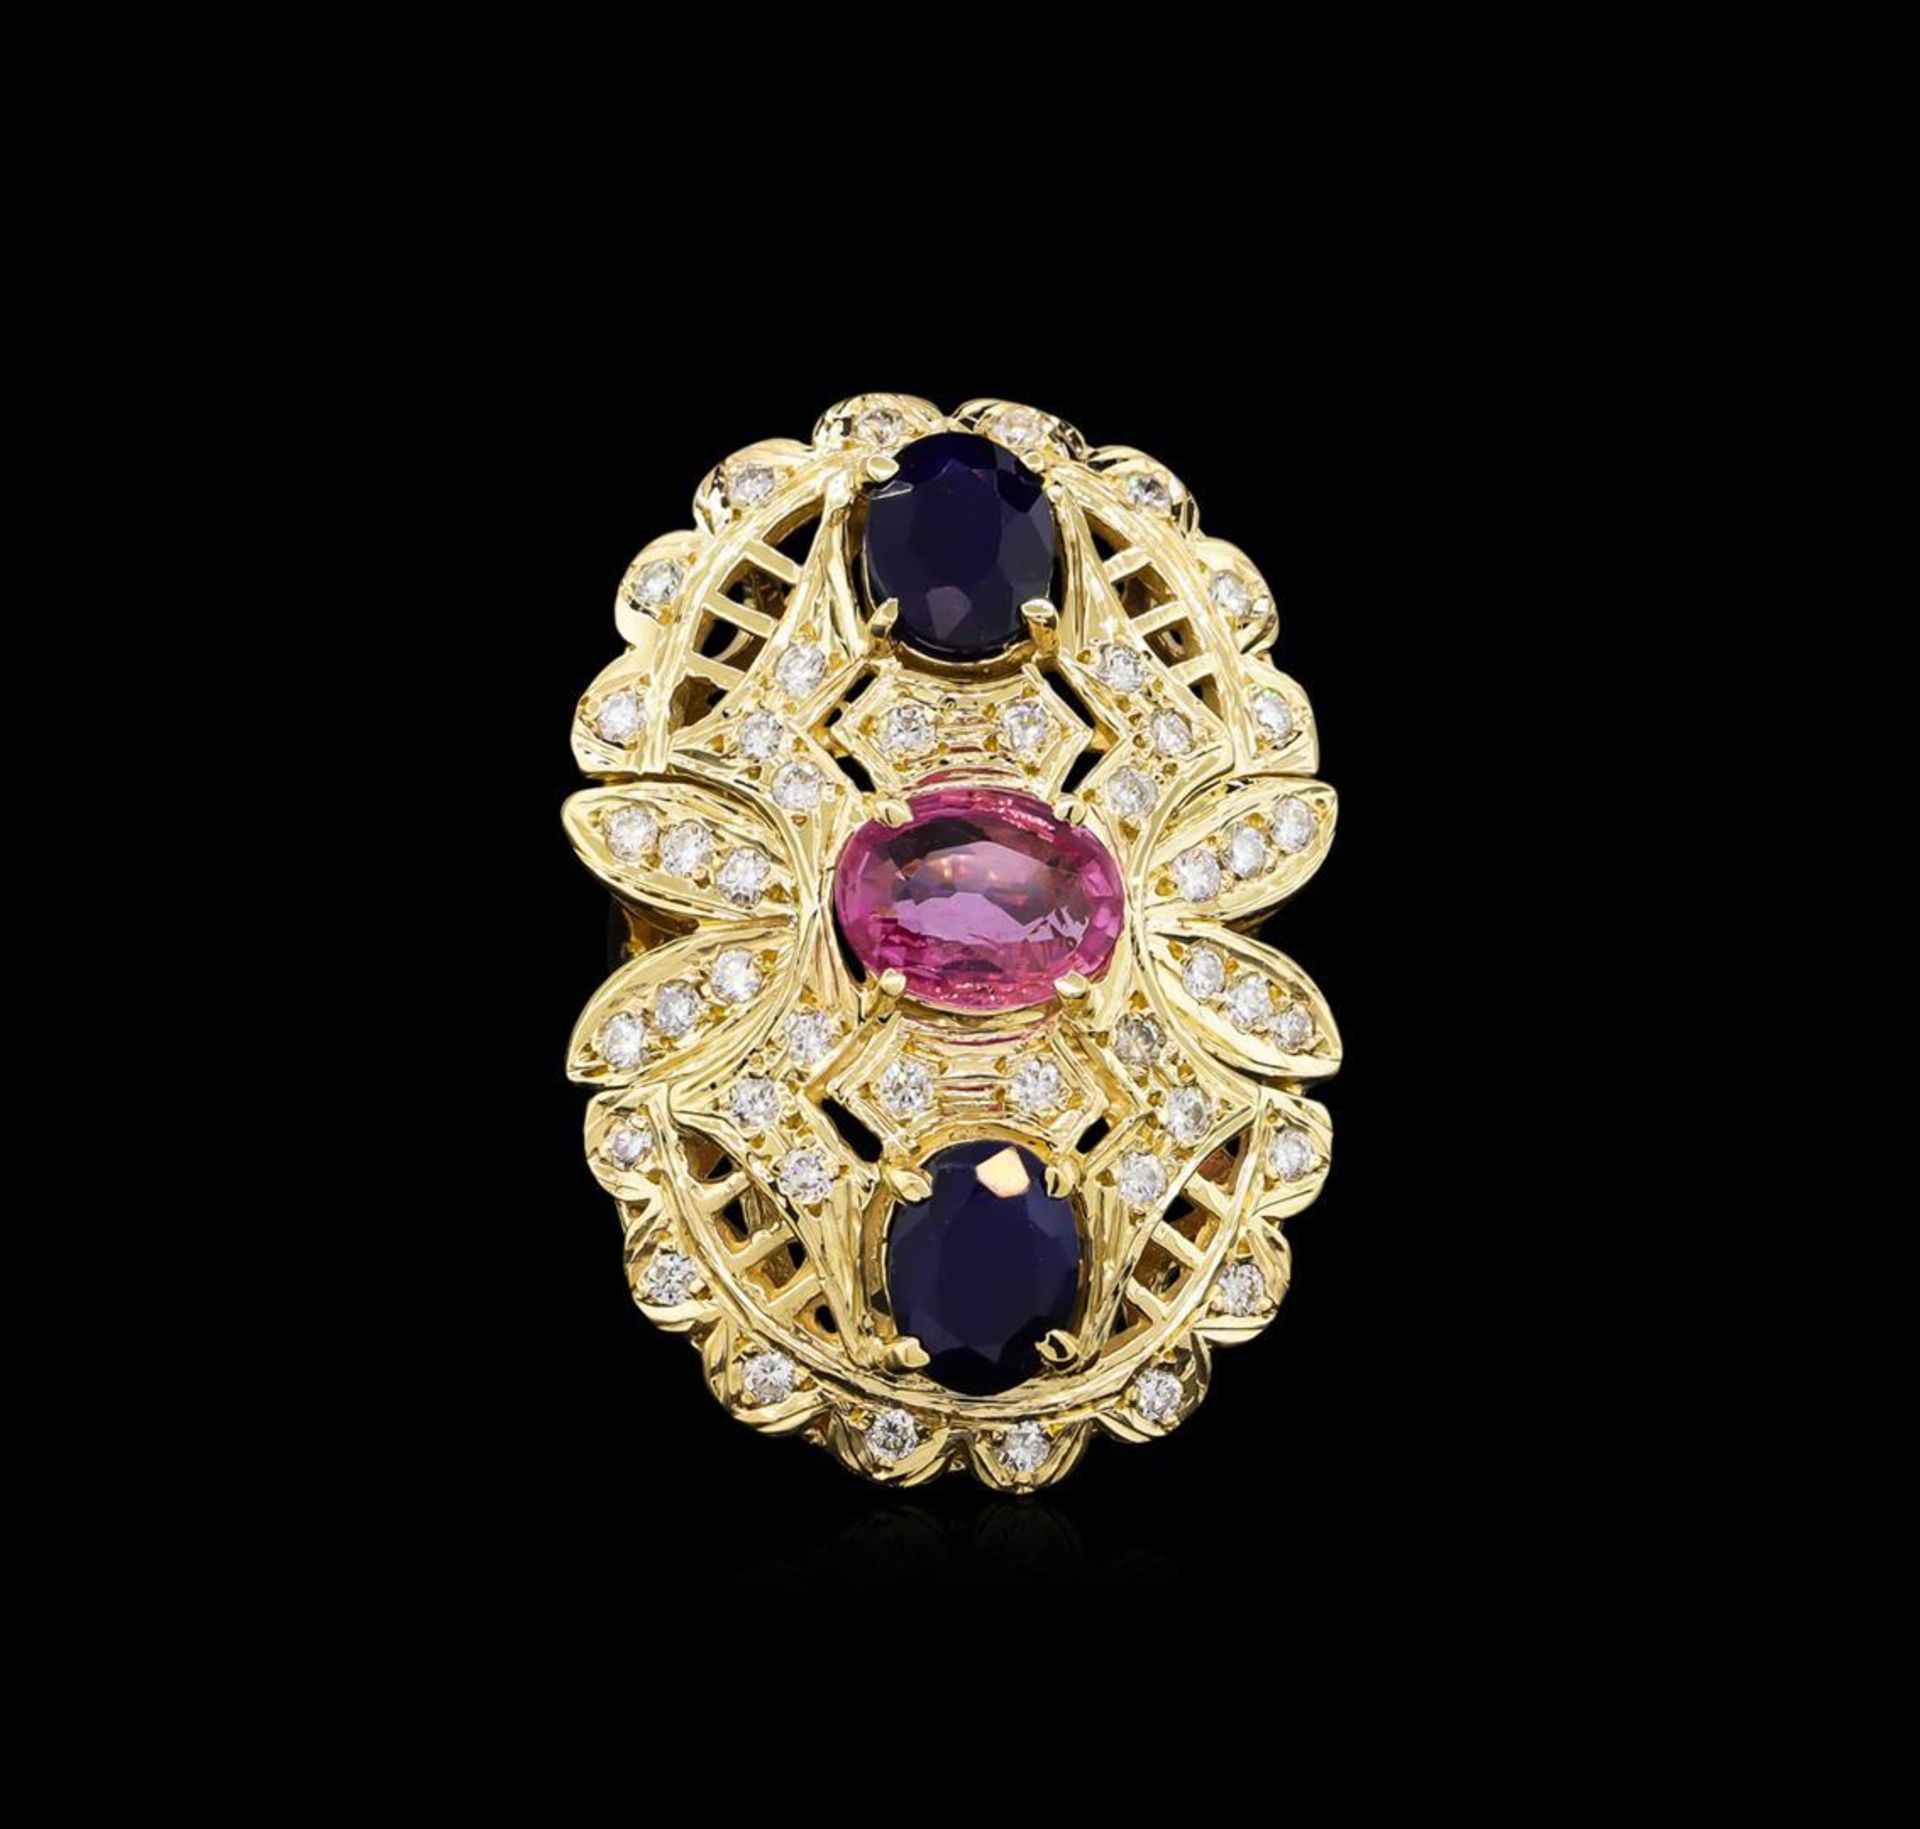 4.58 ctw Sapphire and Diamond Ring - 14KT Yellow Gold - Image 2 of 5